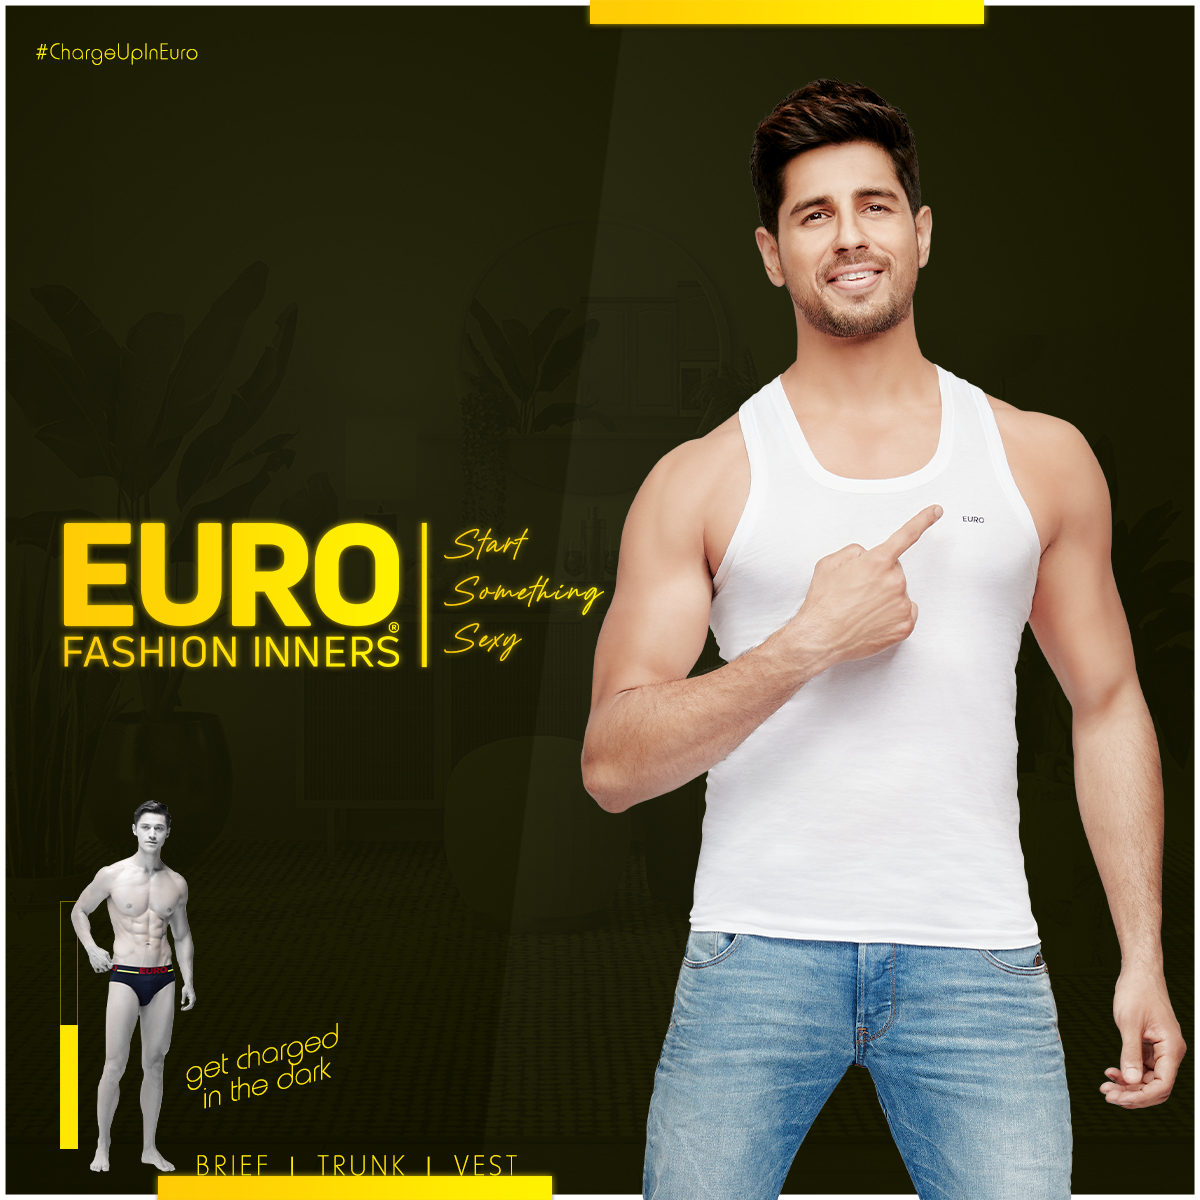 Euro Fashions on X: Be simple but stylish with Euro Fashion